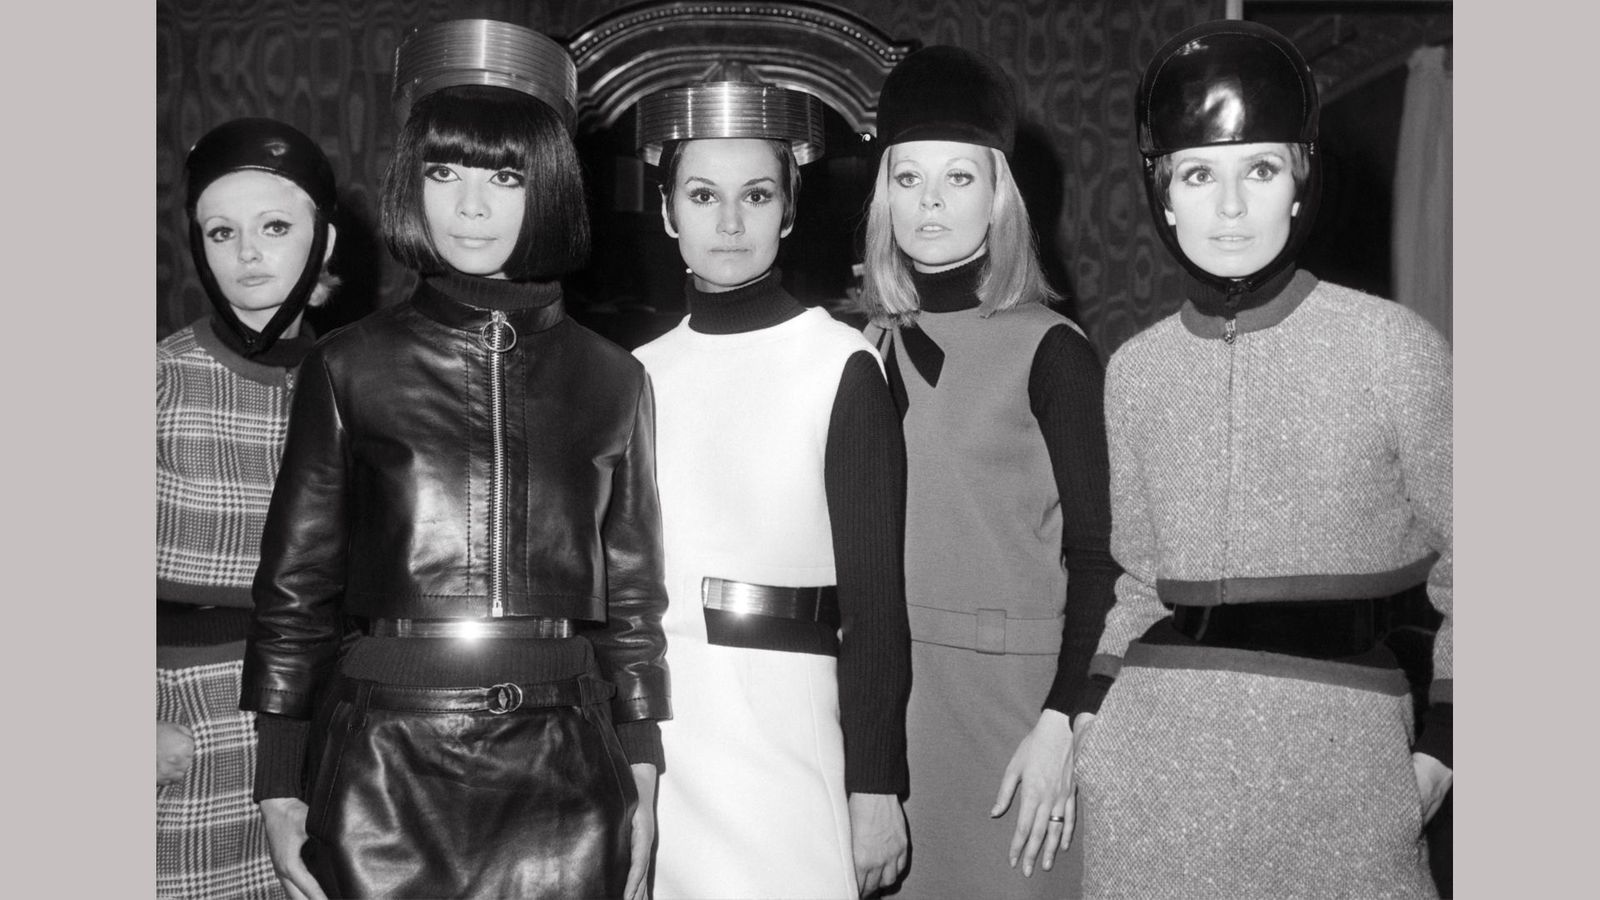 How the 1960s’ space-age fashions changed what we wear - BBC Culture